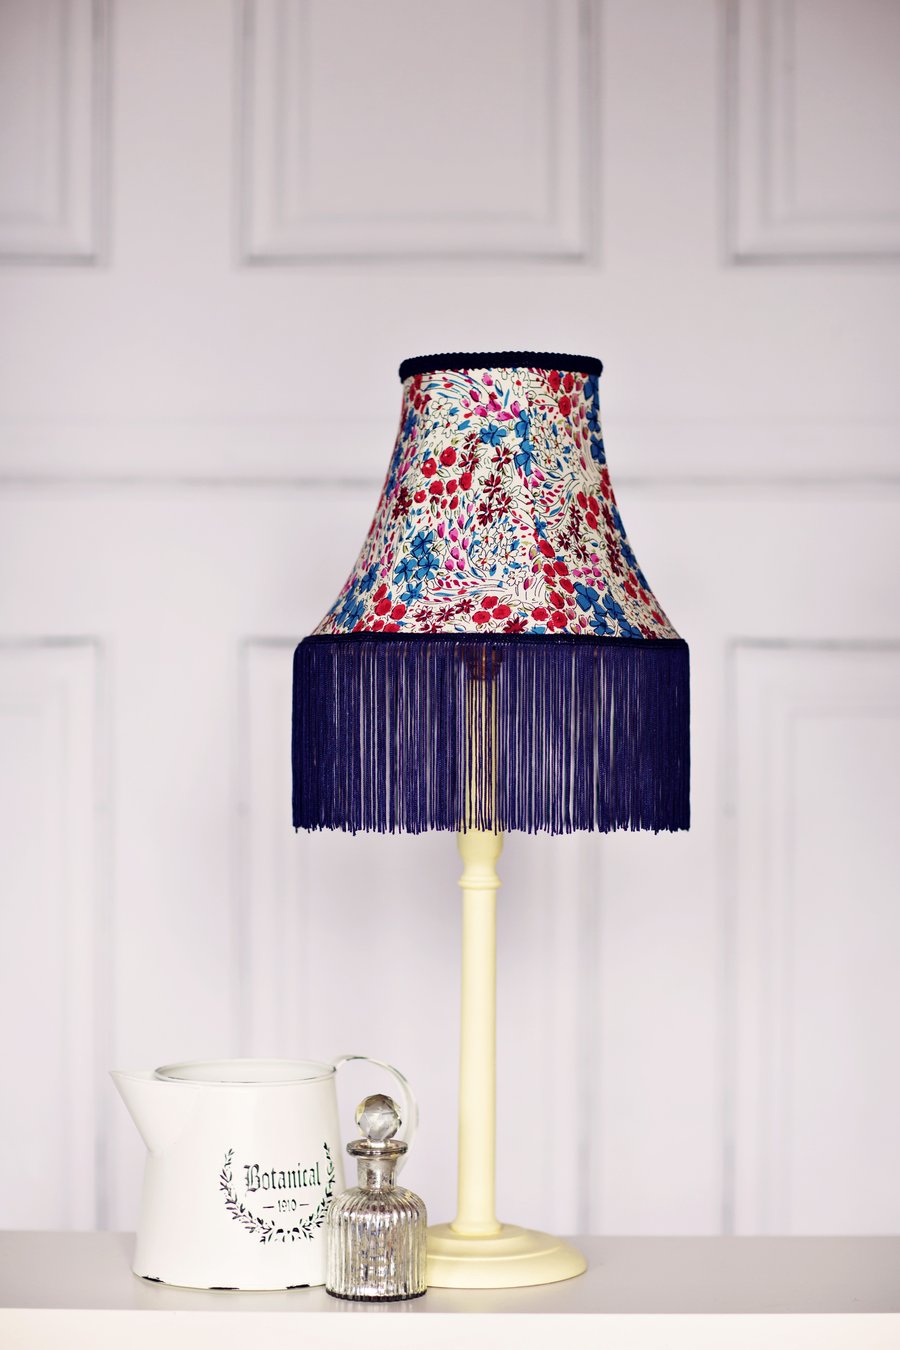 Lampshade Hand stitched White, Blue and Red Floral Lamp Shade